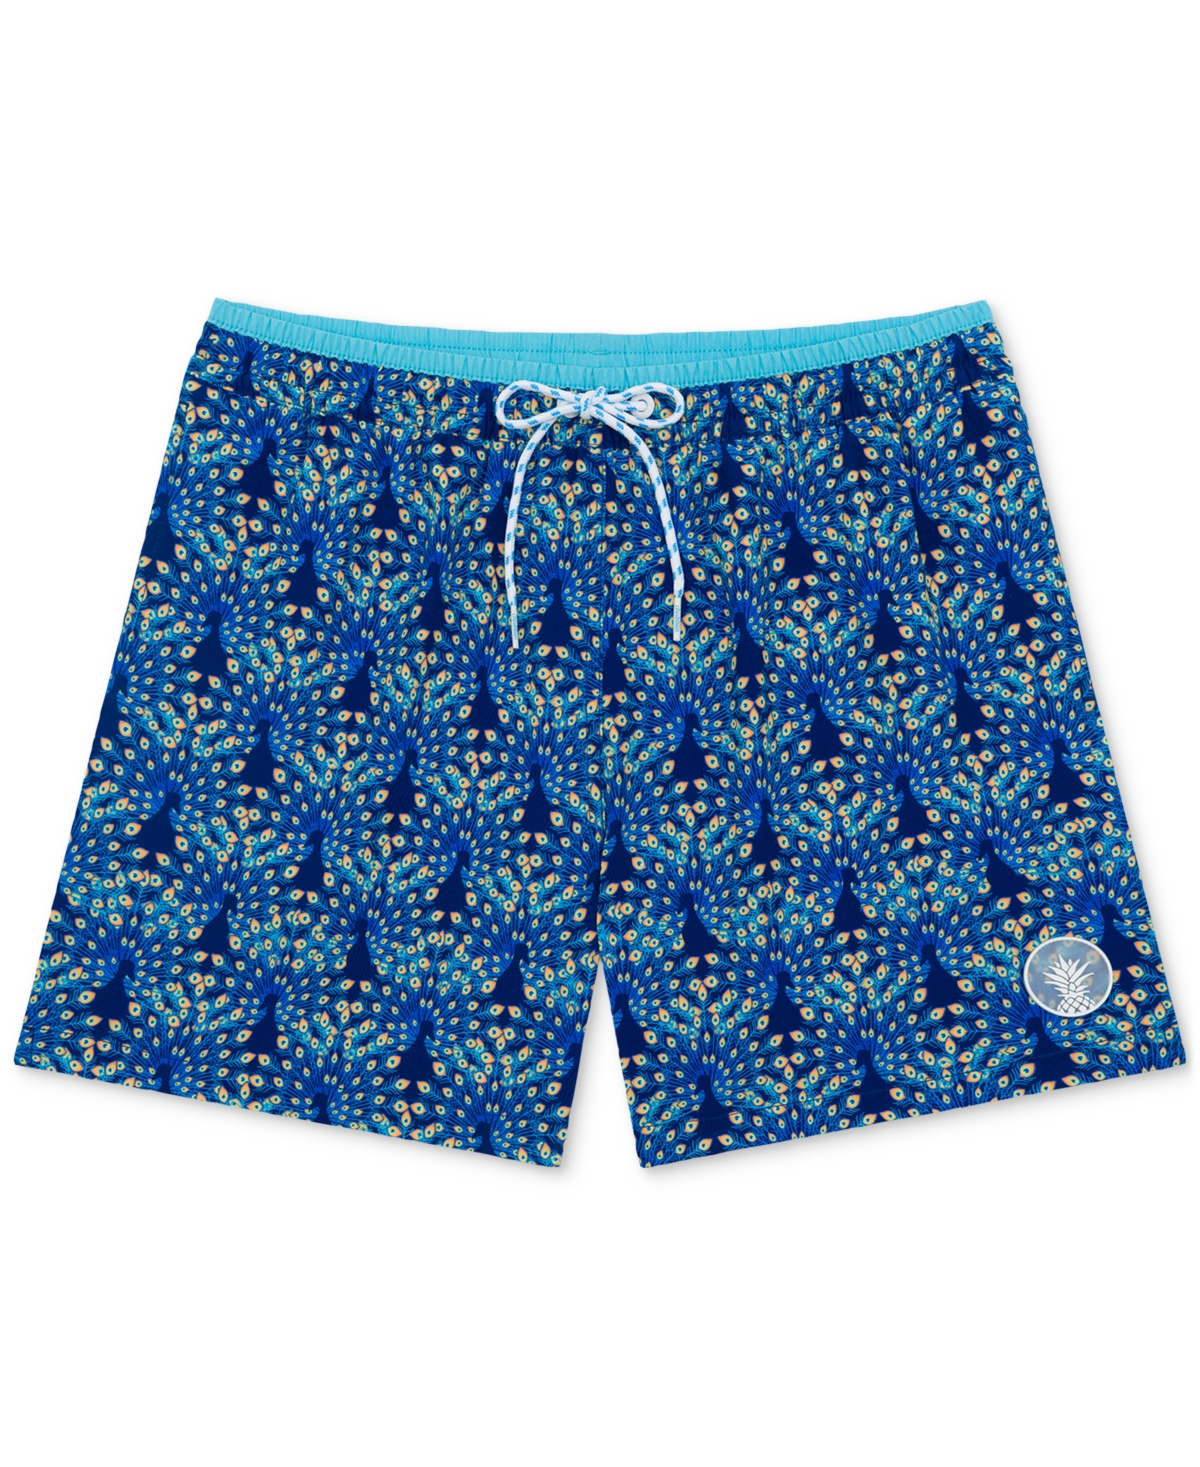 Shop Chubbies Men's The Fan Outs Quick-dry 5-1/2" Swim Trunks In Navy